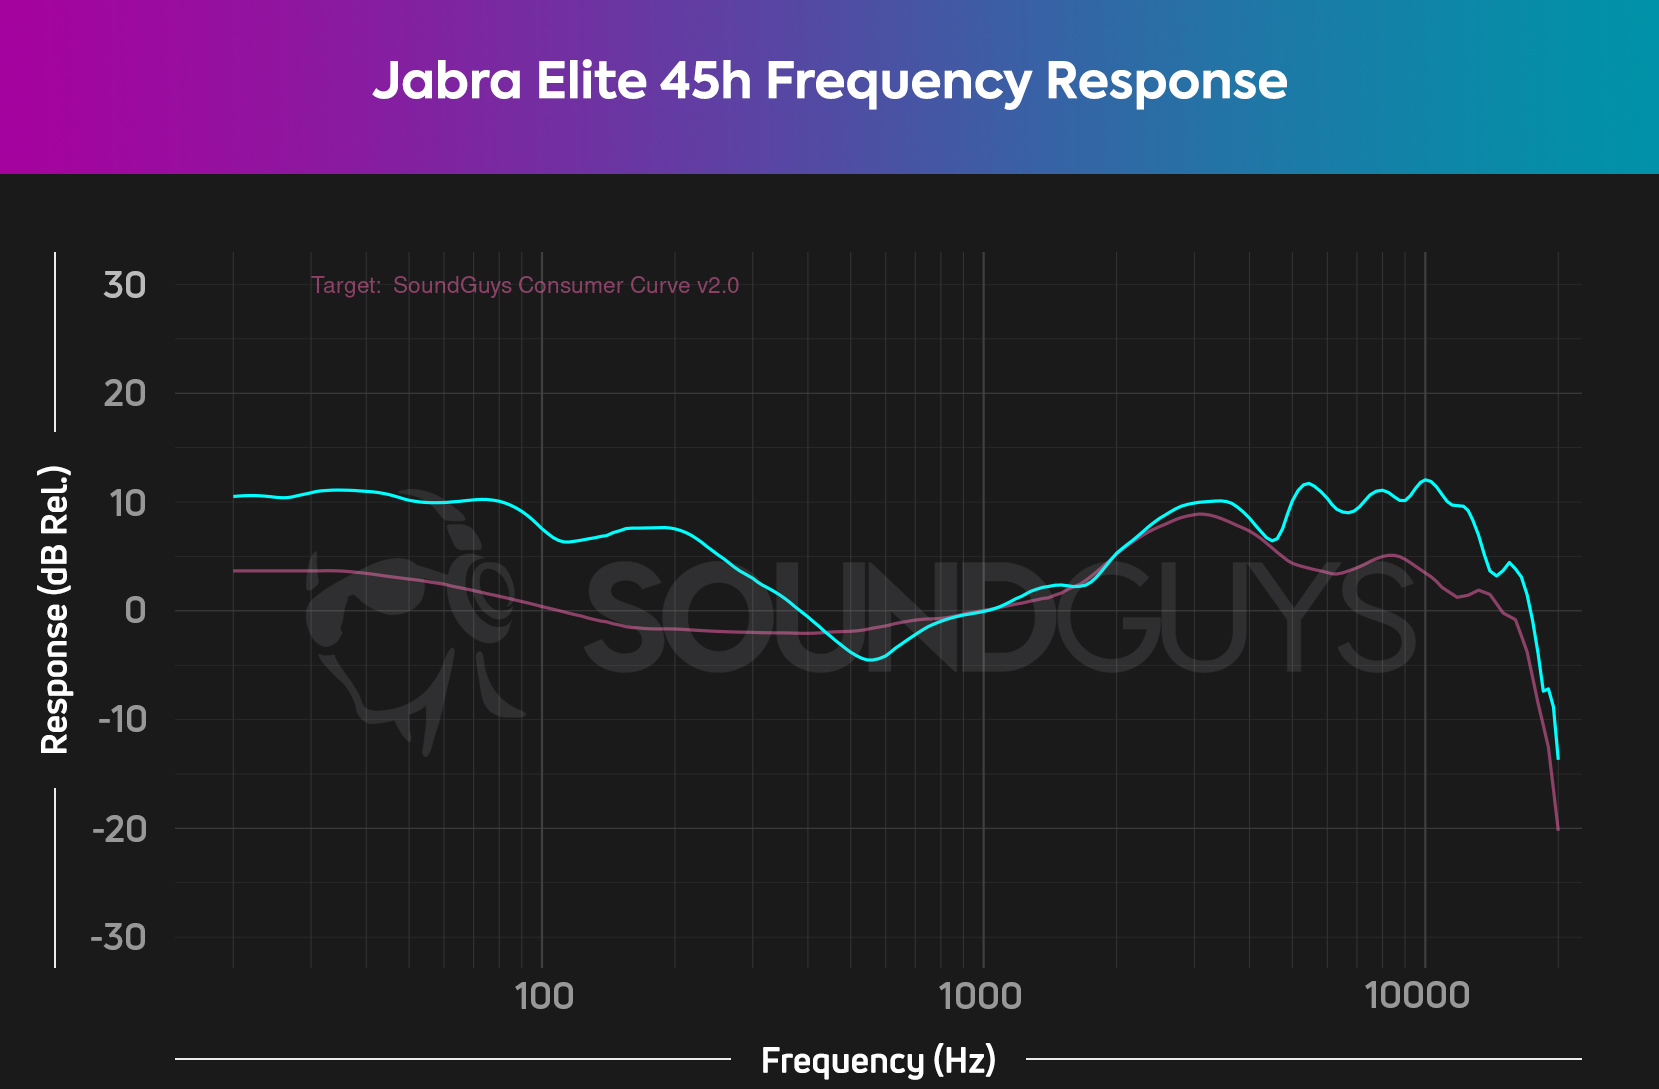 A chart depicts the Jabra Elite 45h (cyan) frequency response relative to the SoundGuys Consumer Curve V2 (pink), revealing the 45h's amplified bass response.